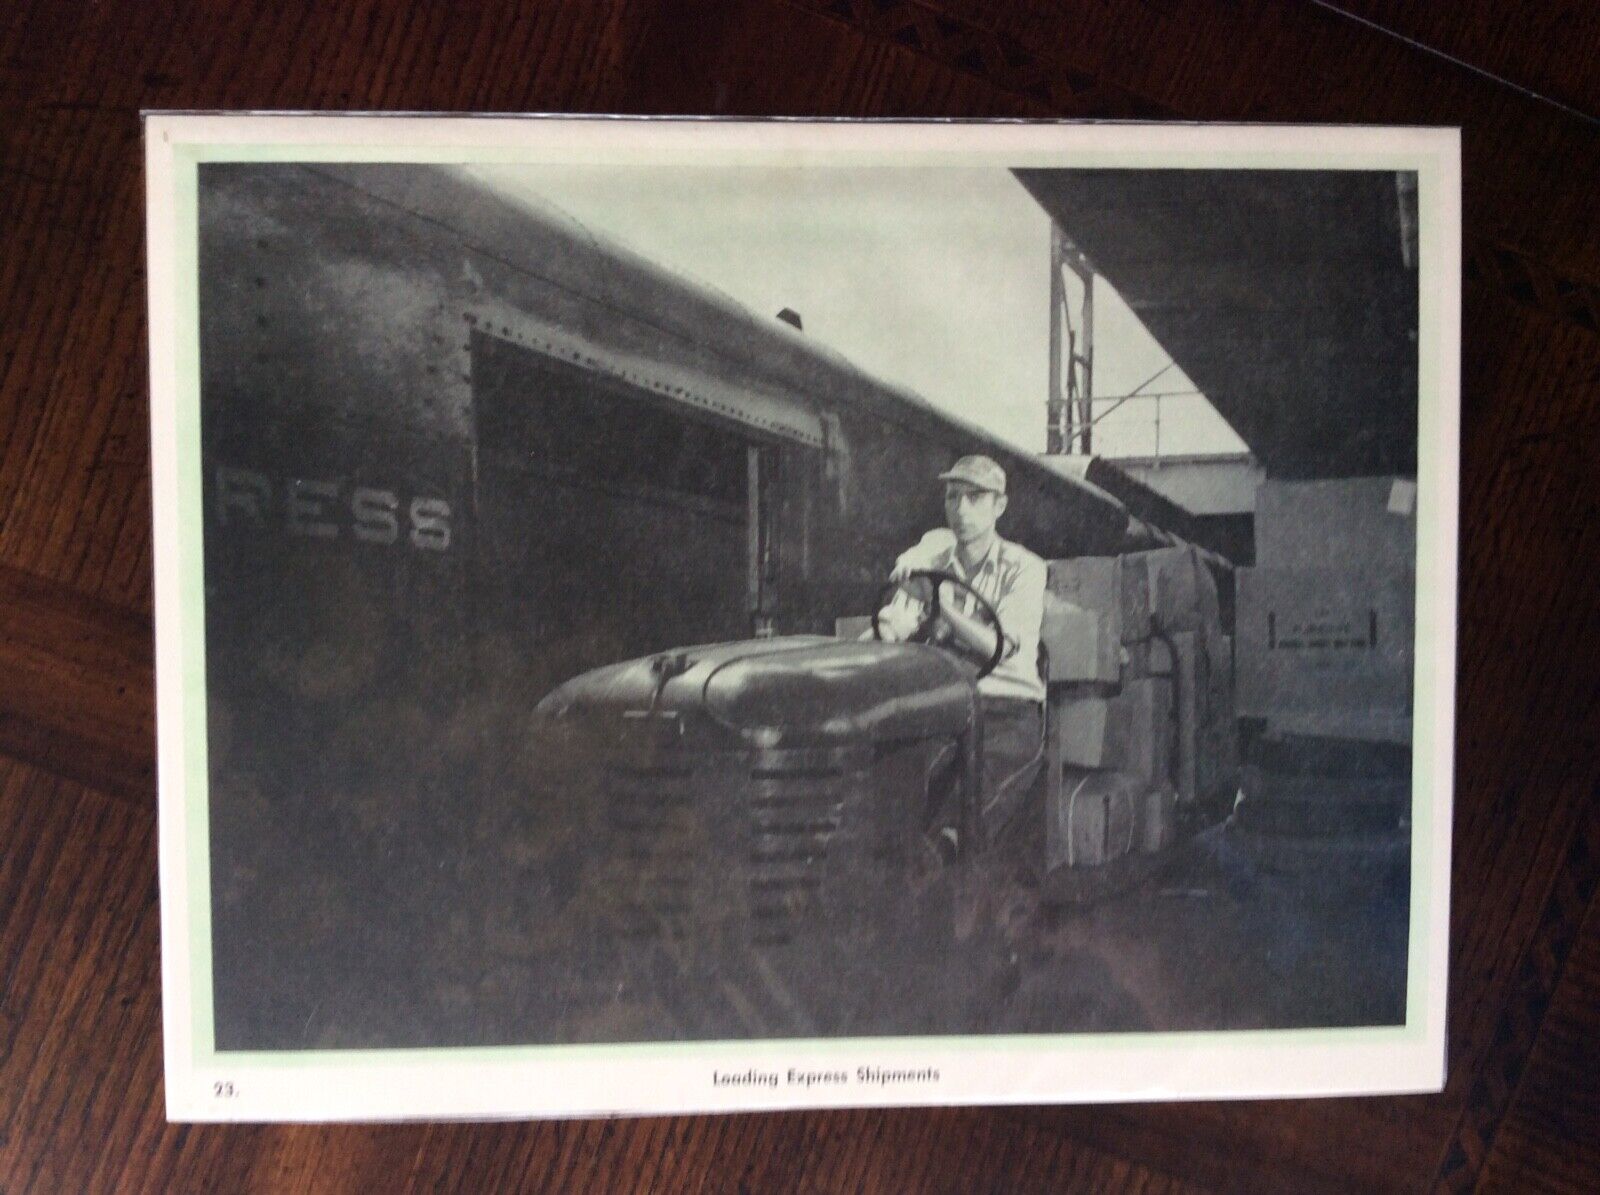 vintage 1950’s Railroad Book Photo - Loading Express Shipments On Freight Cars